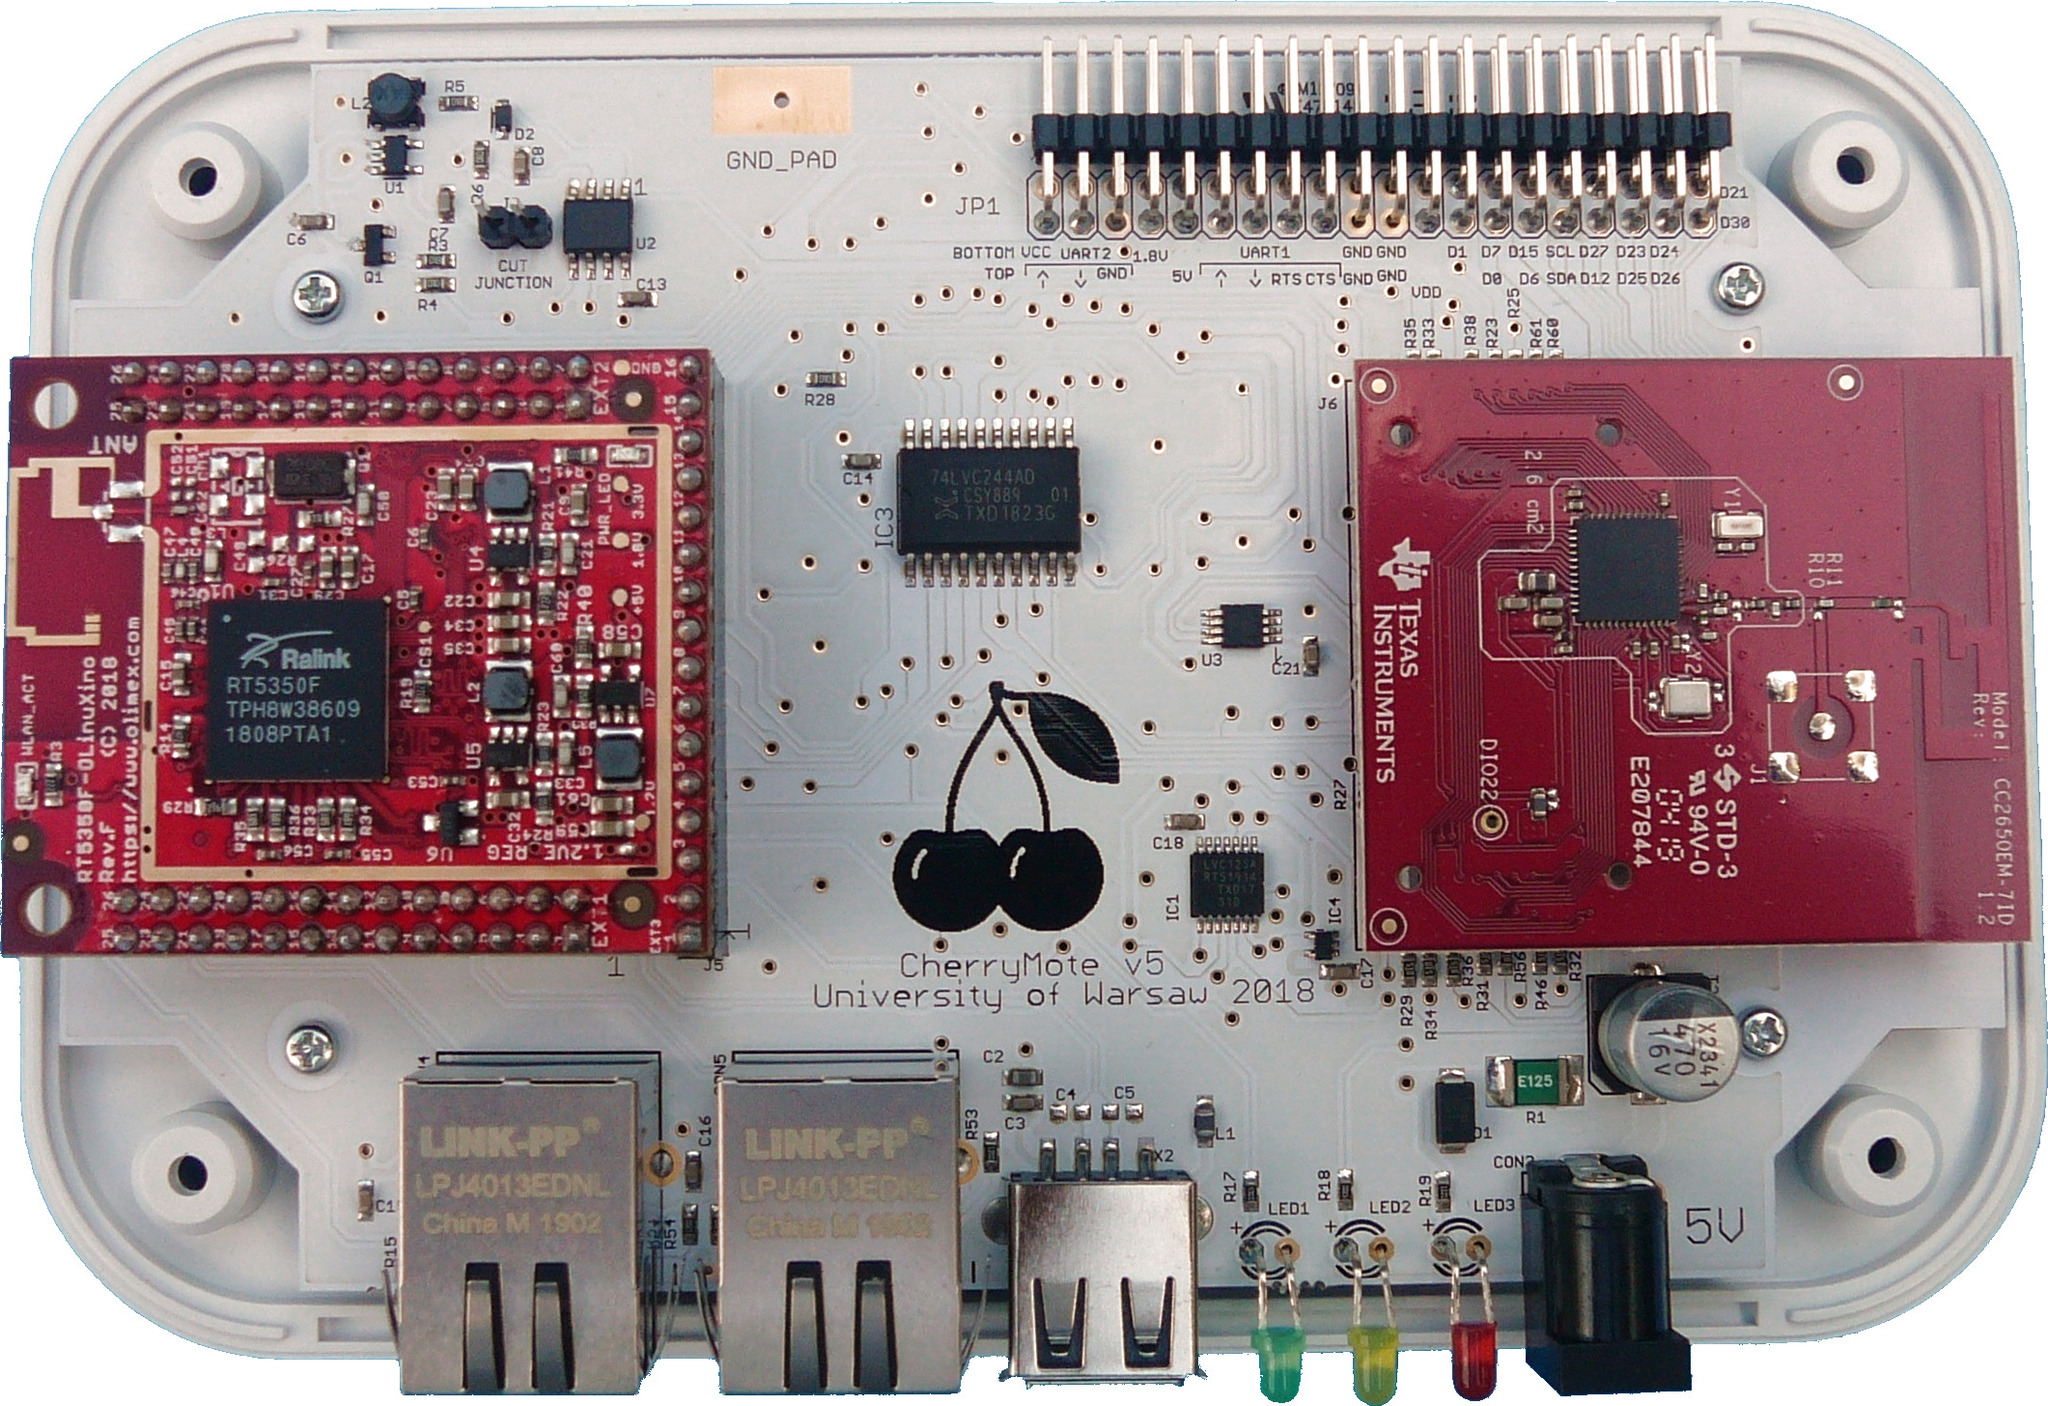 A photo of the inside of CherryMote. There are three PCB: Experimental Device and Supervising Device are mounted on the main PCB. The main PCB hosts also Ethernet ports, a USB port, LEDs, and a power supply port.